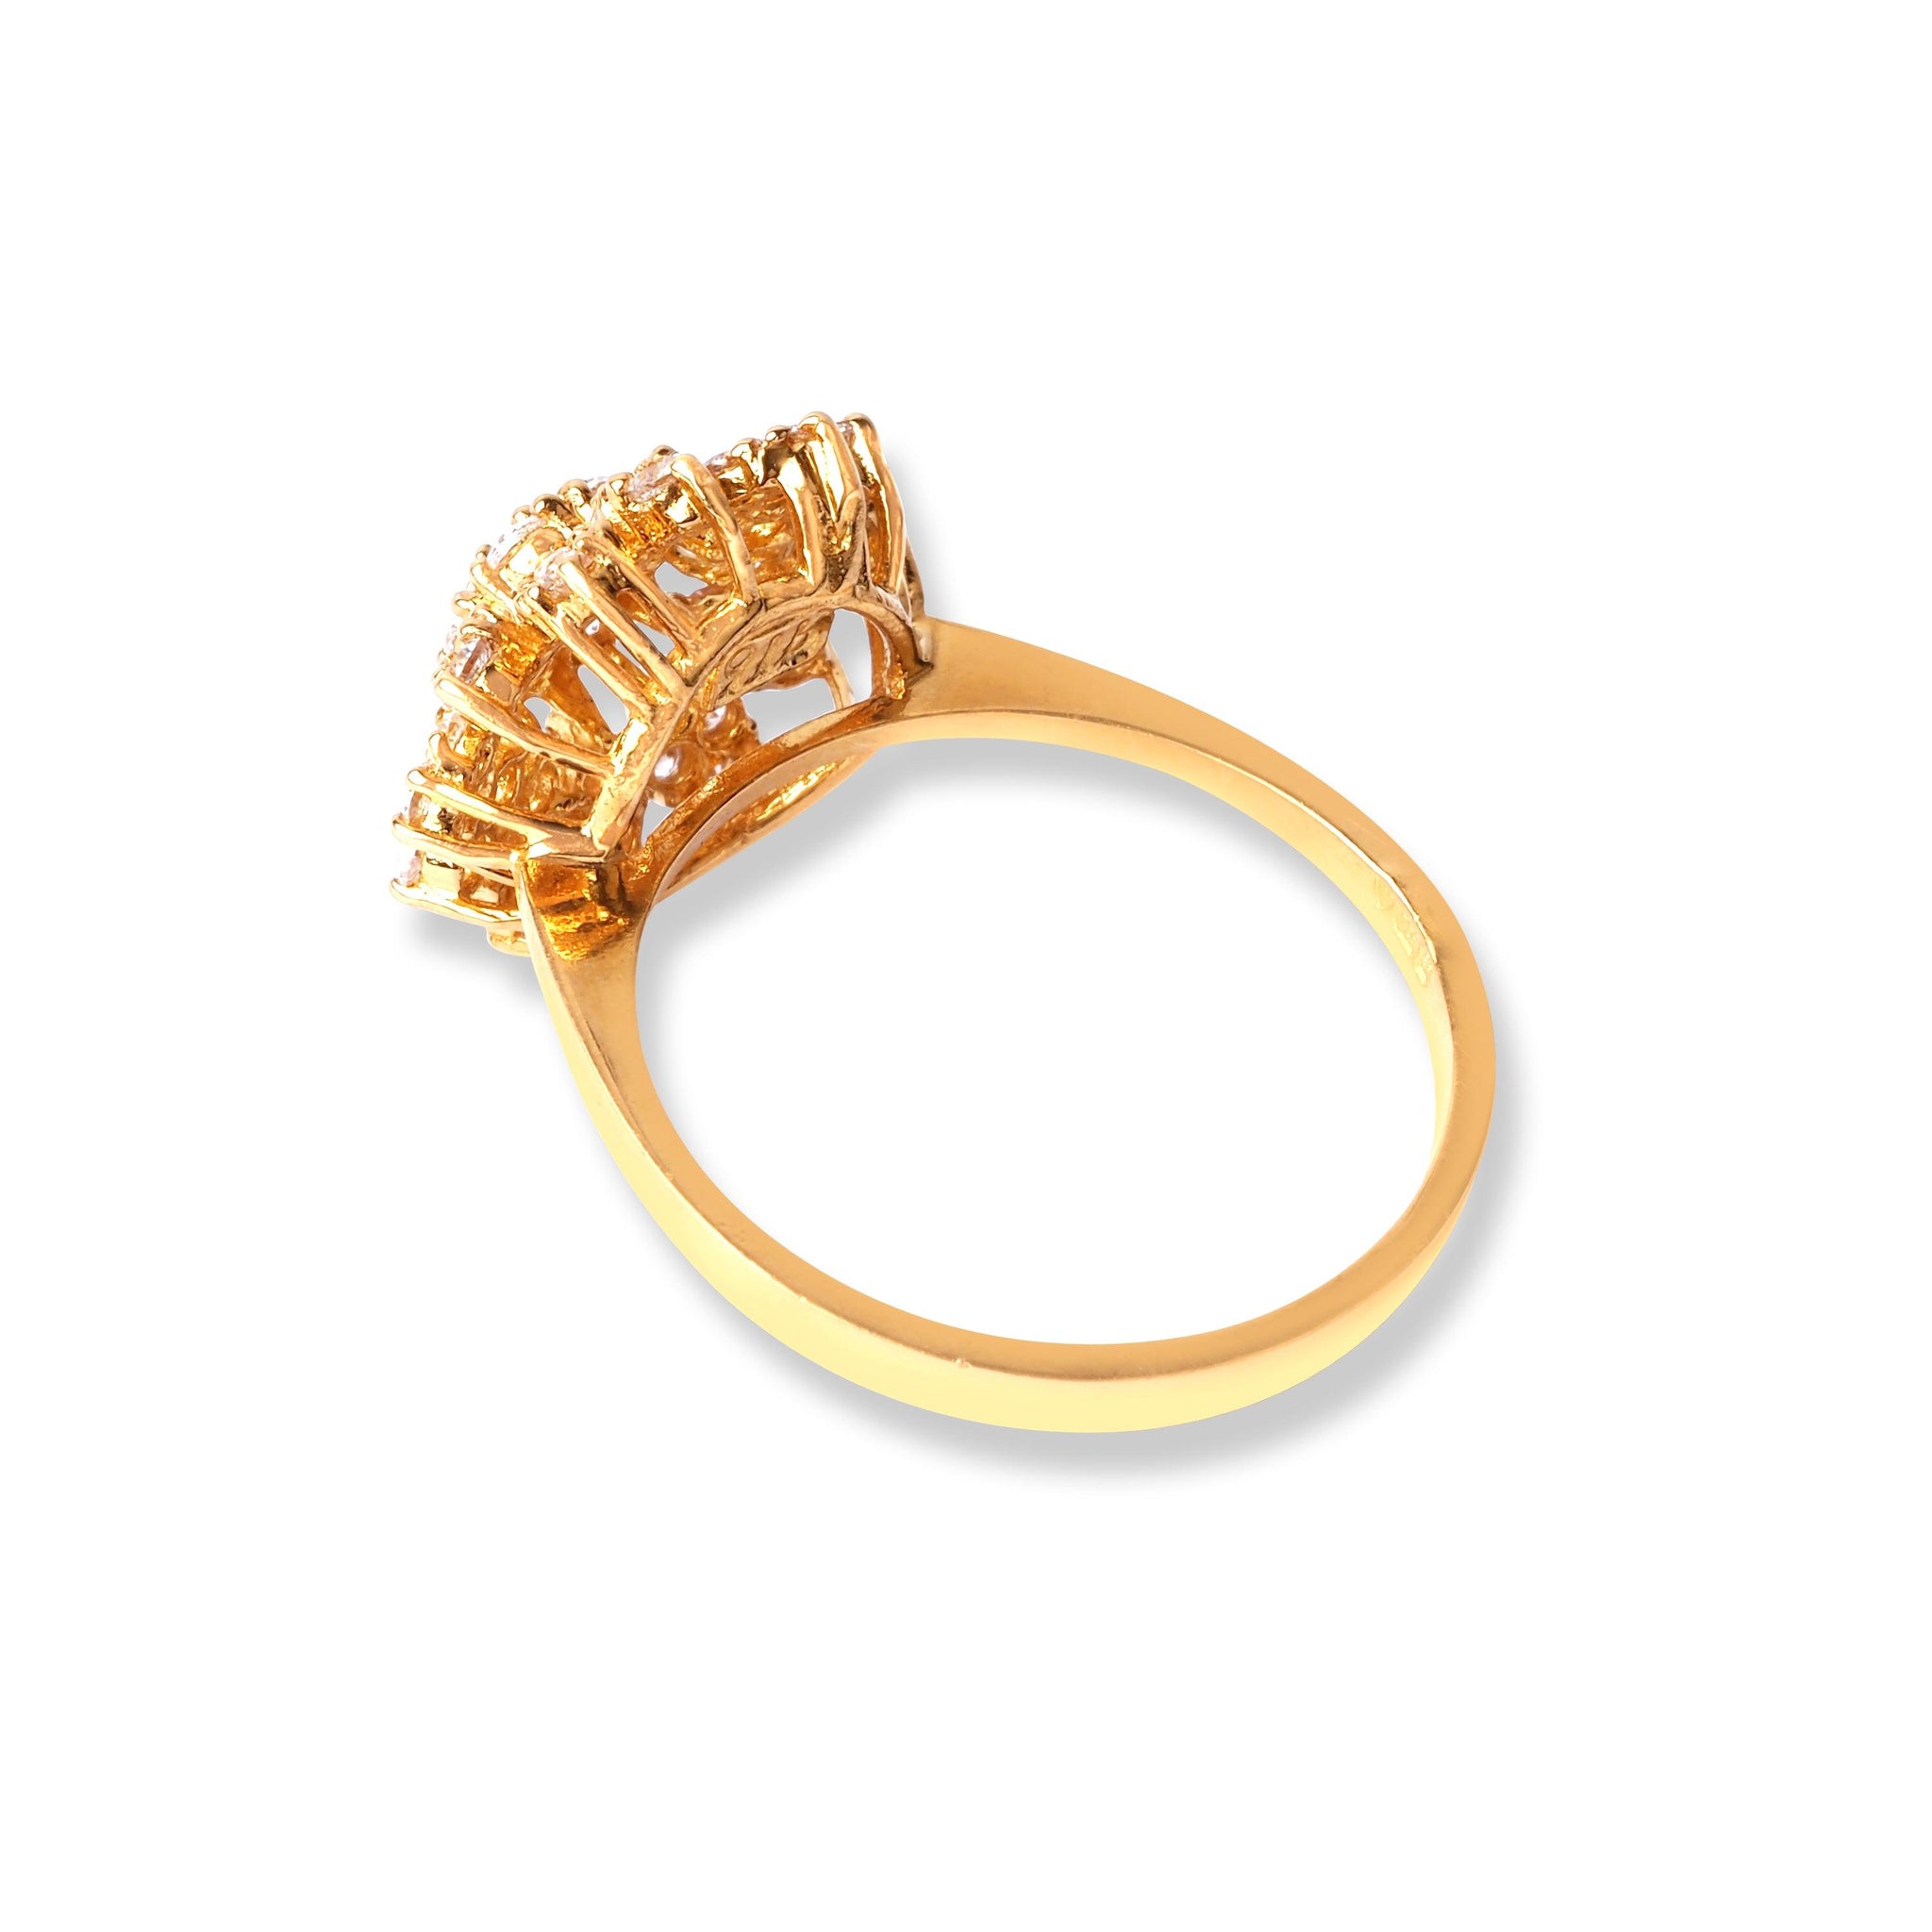 22ct Gold Ring With Cubic Zirconia Stones (3.6g) LR-6592